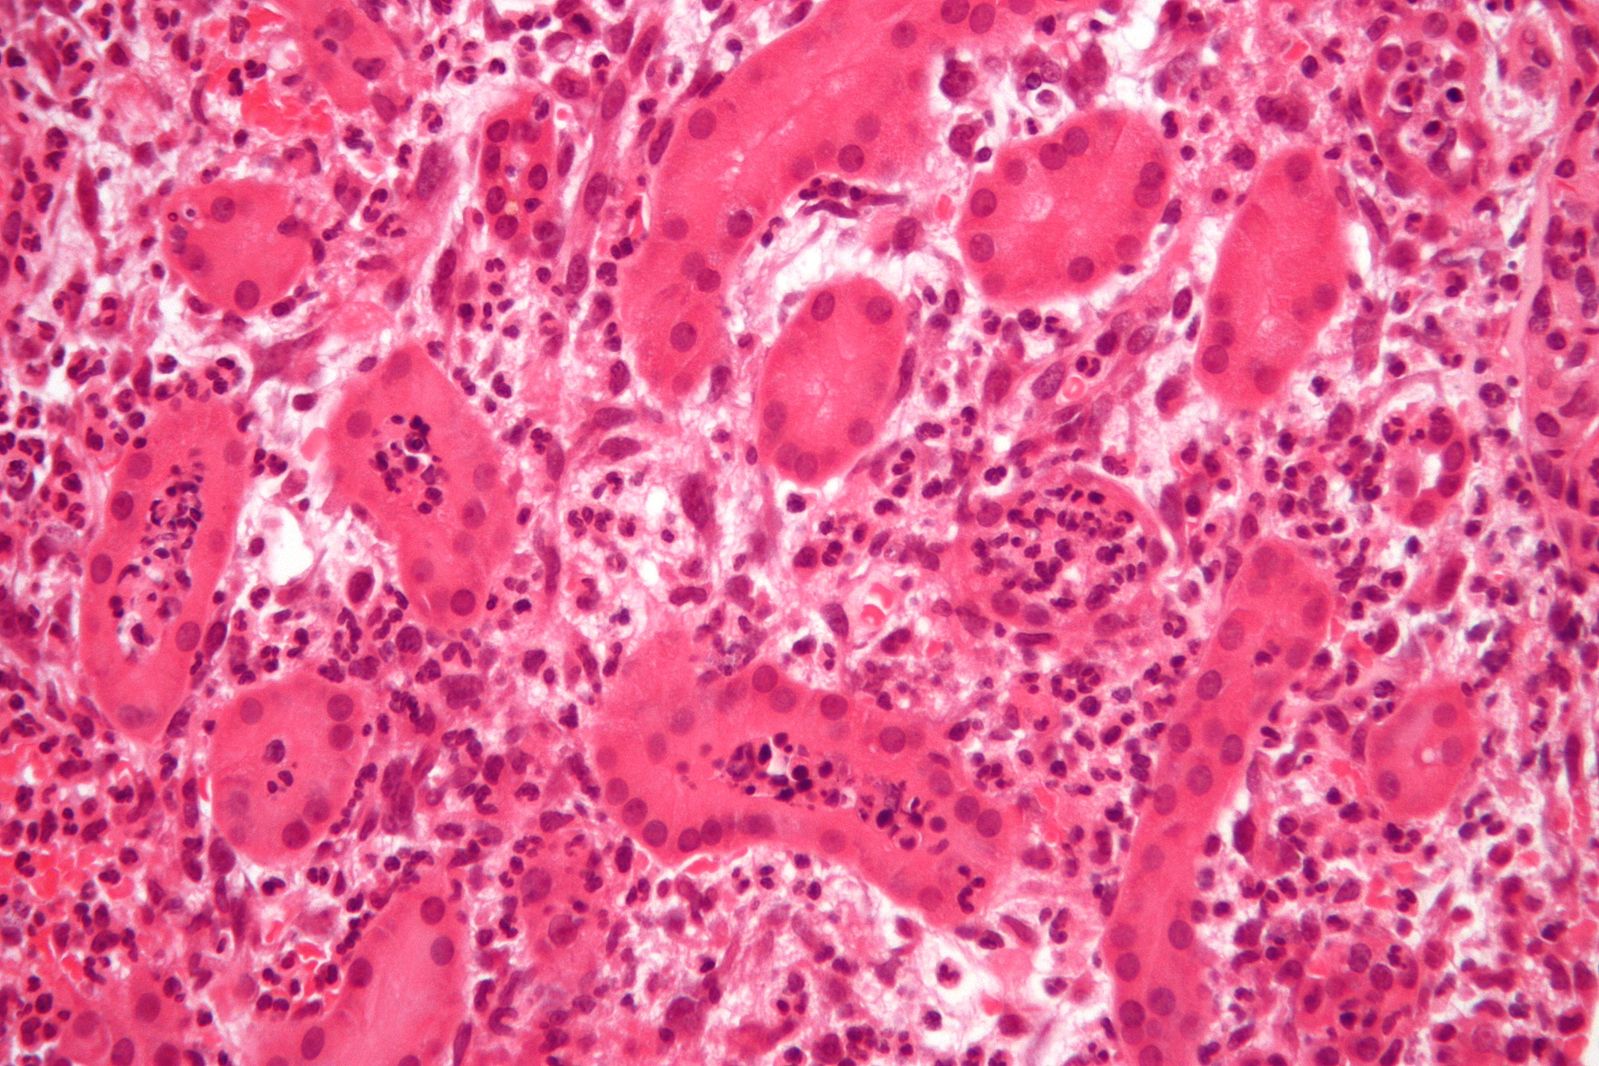 Acute Pyelonephritis with neutrophils within the tables and interstitium. Source: Libre Pathology[16]